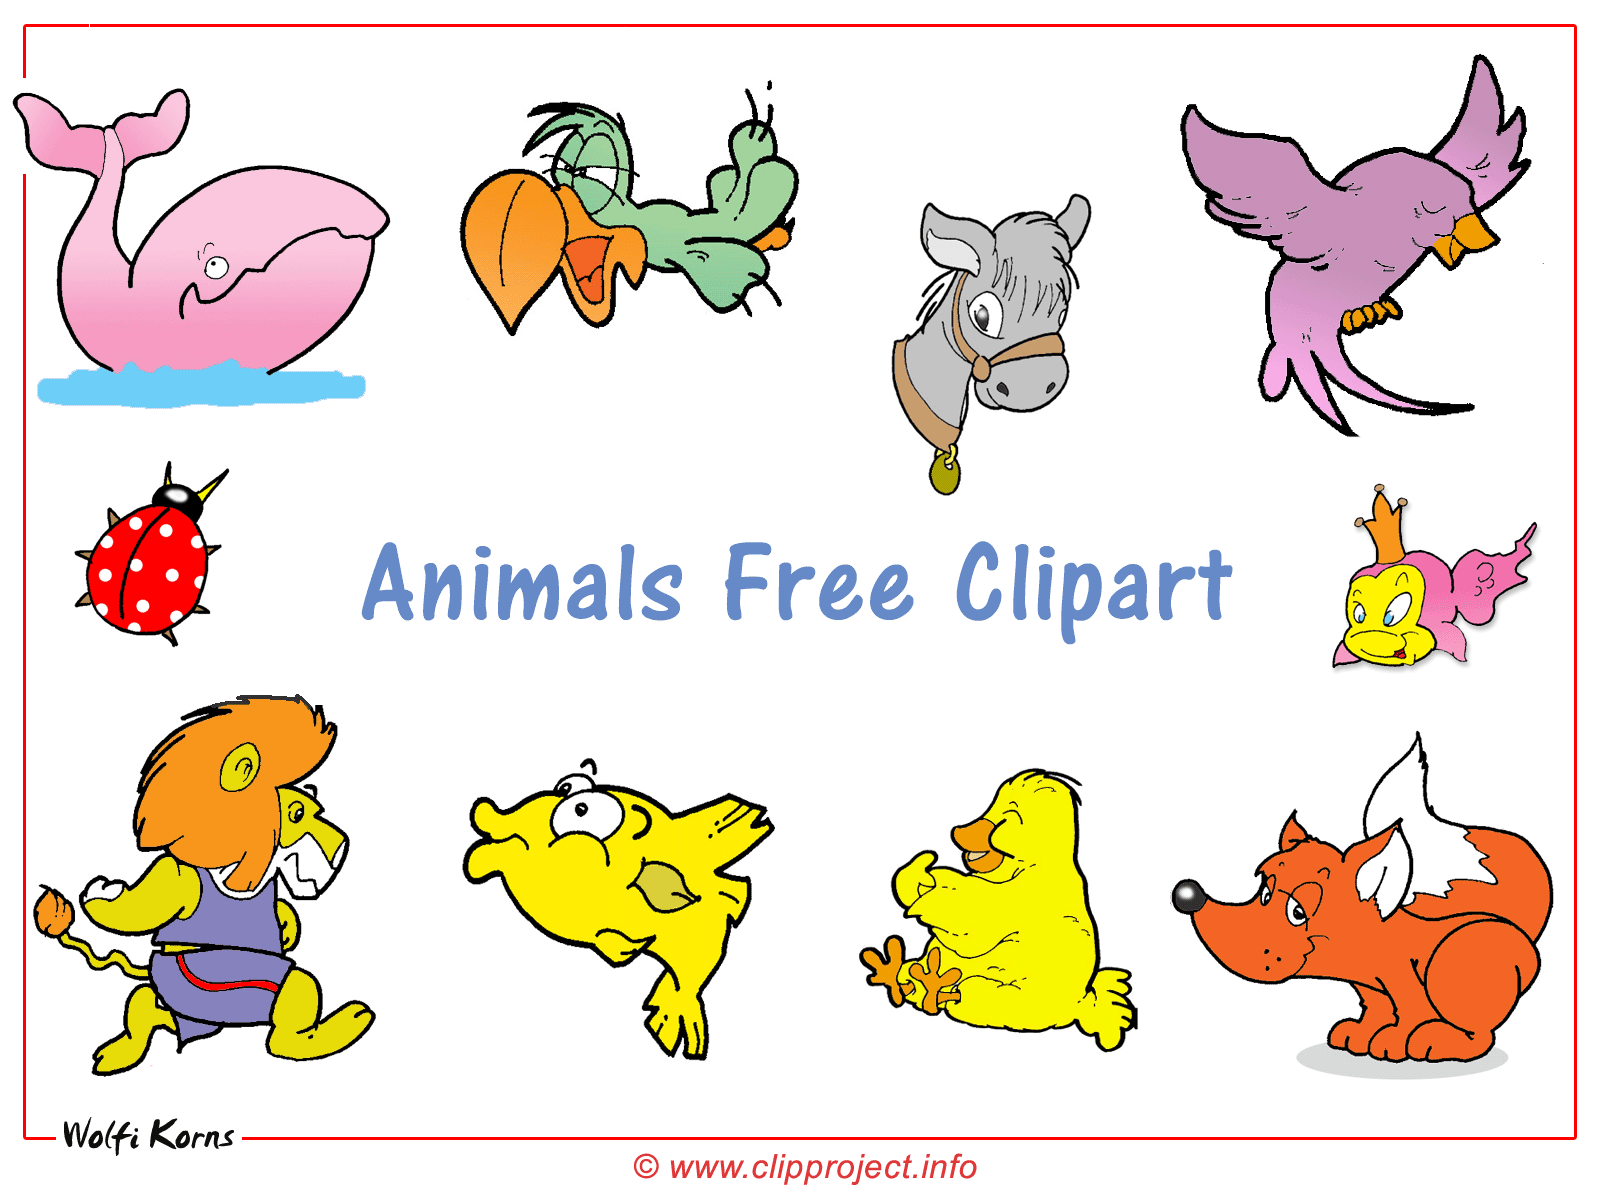 Microsoft clipart gallery free download - ClipartFest